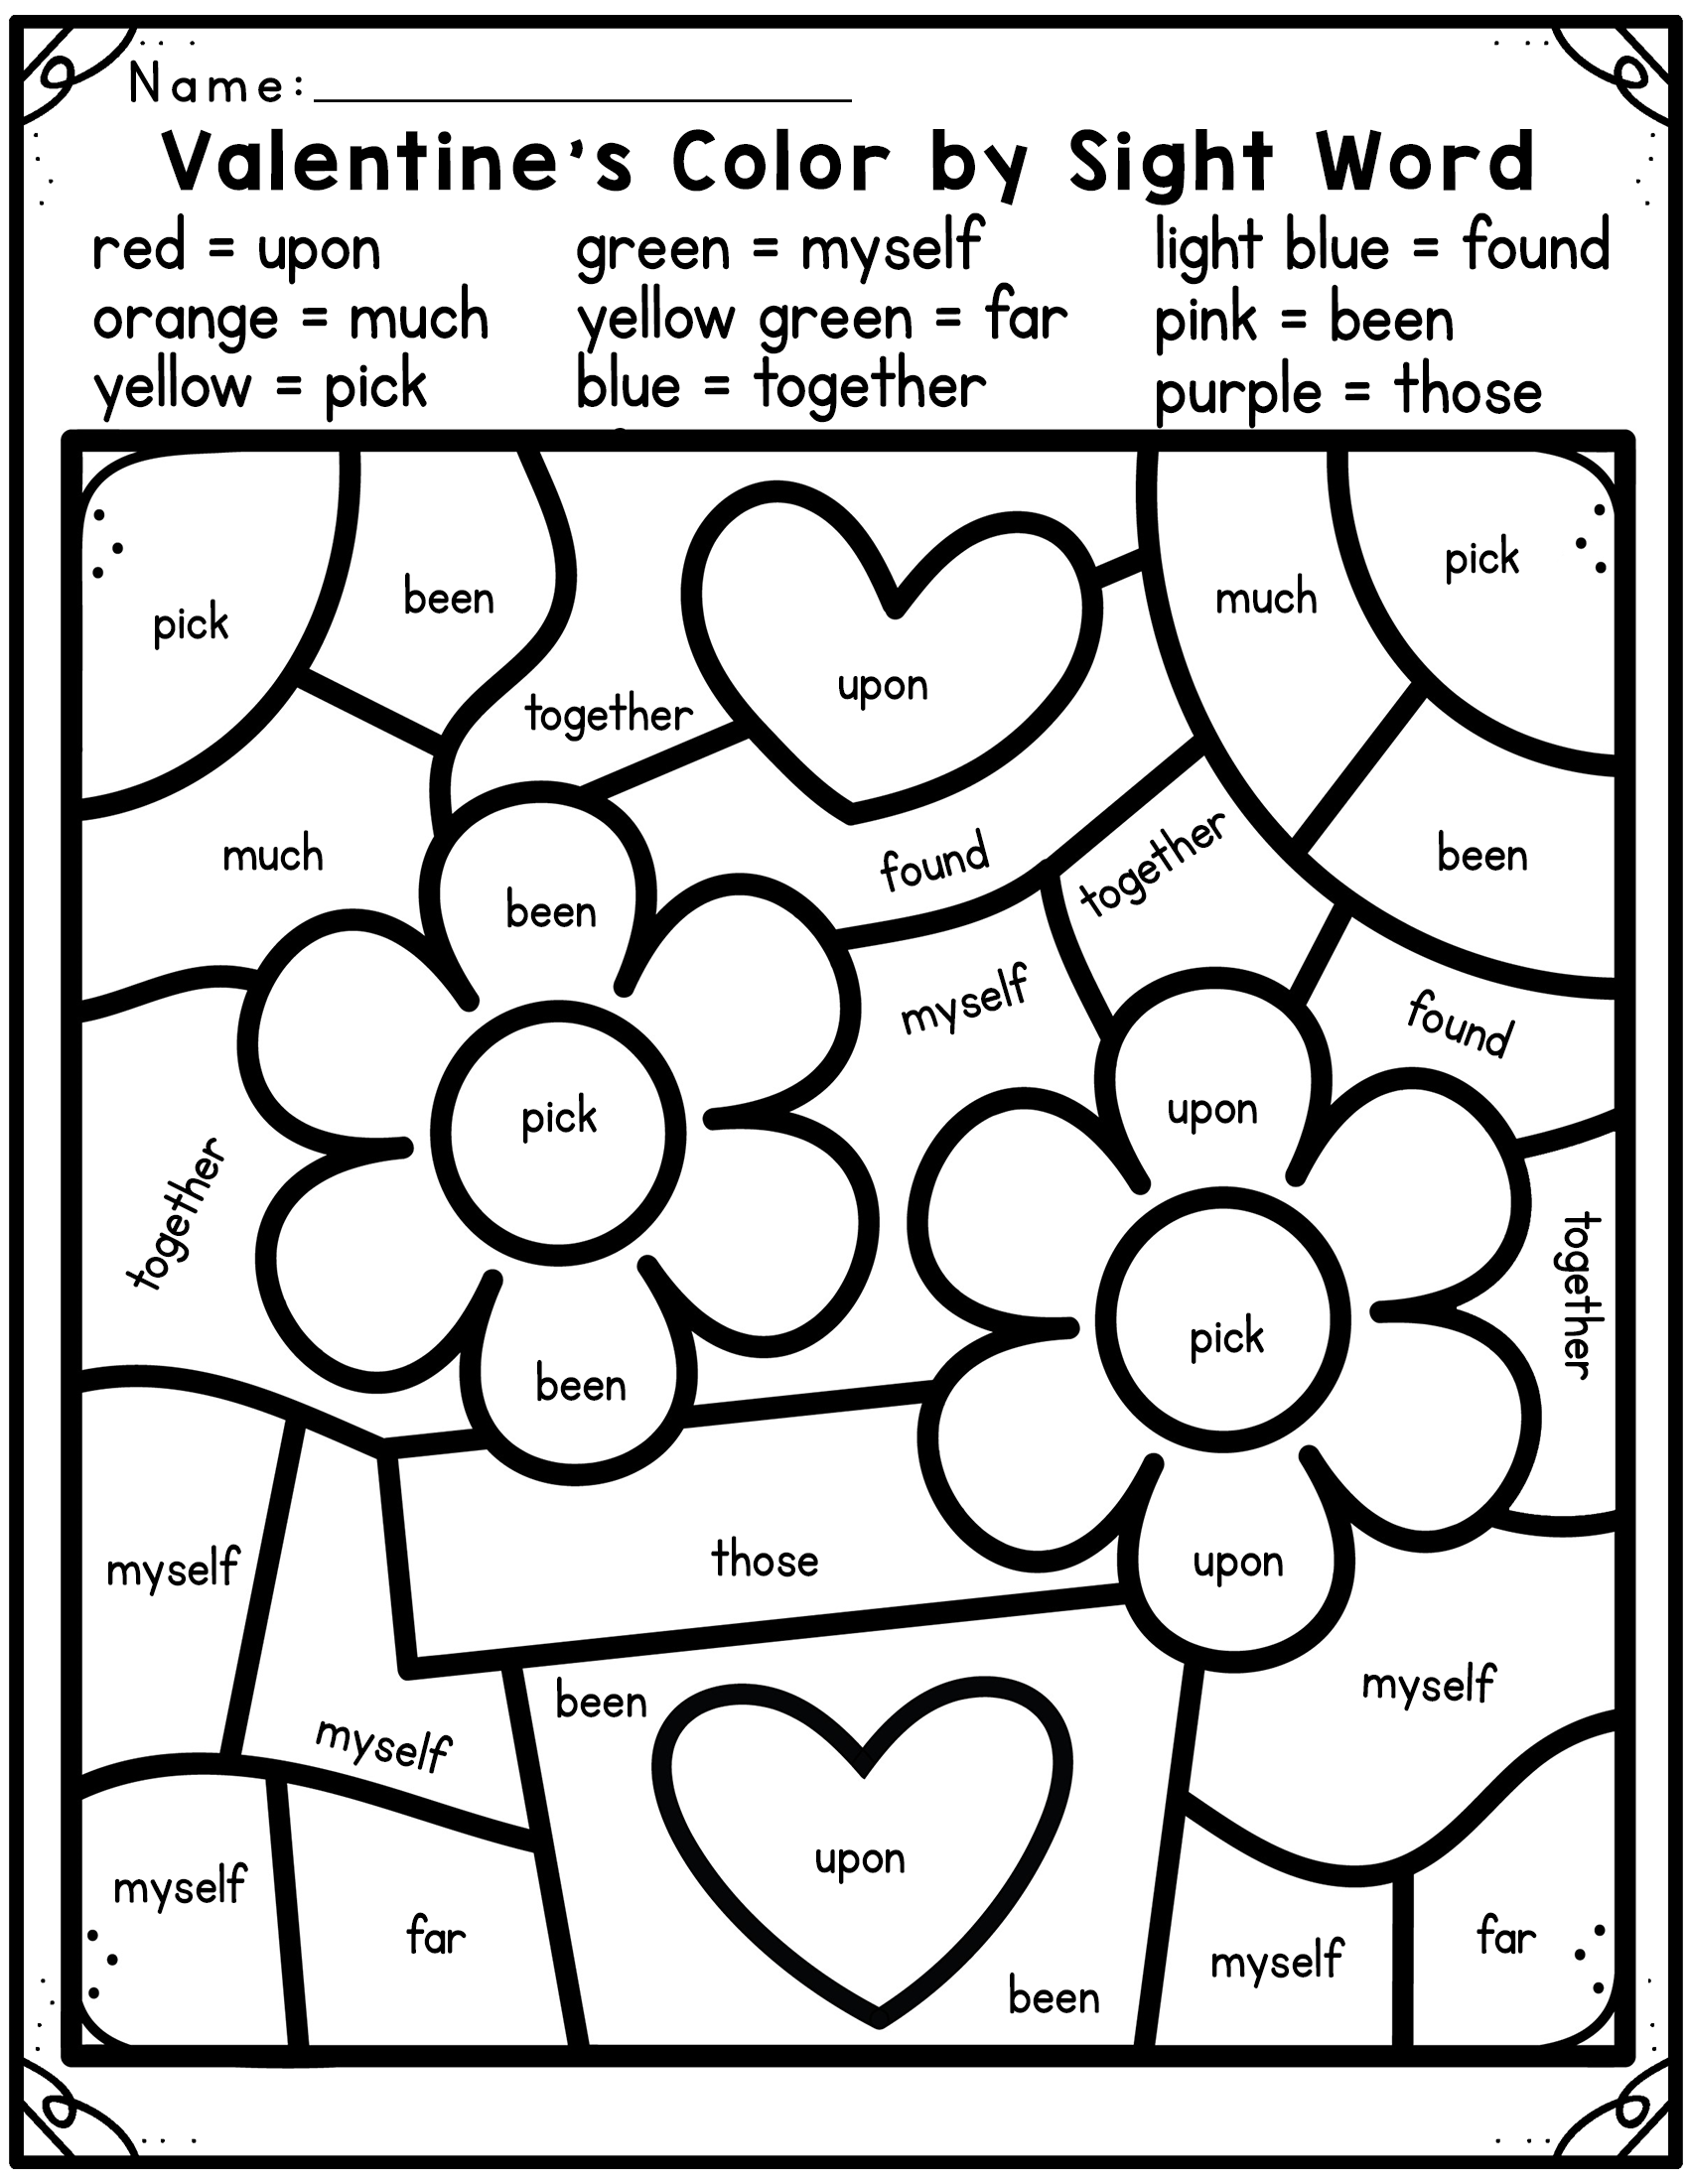 valentine-s-day-color-by-sight-word-by-teachers-coloring-home